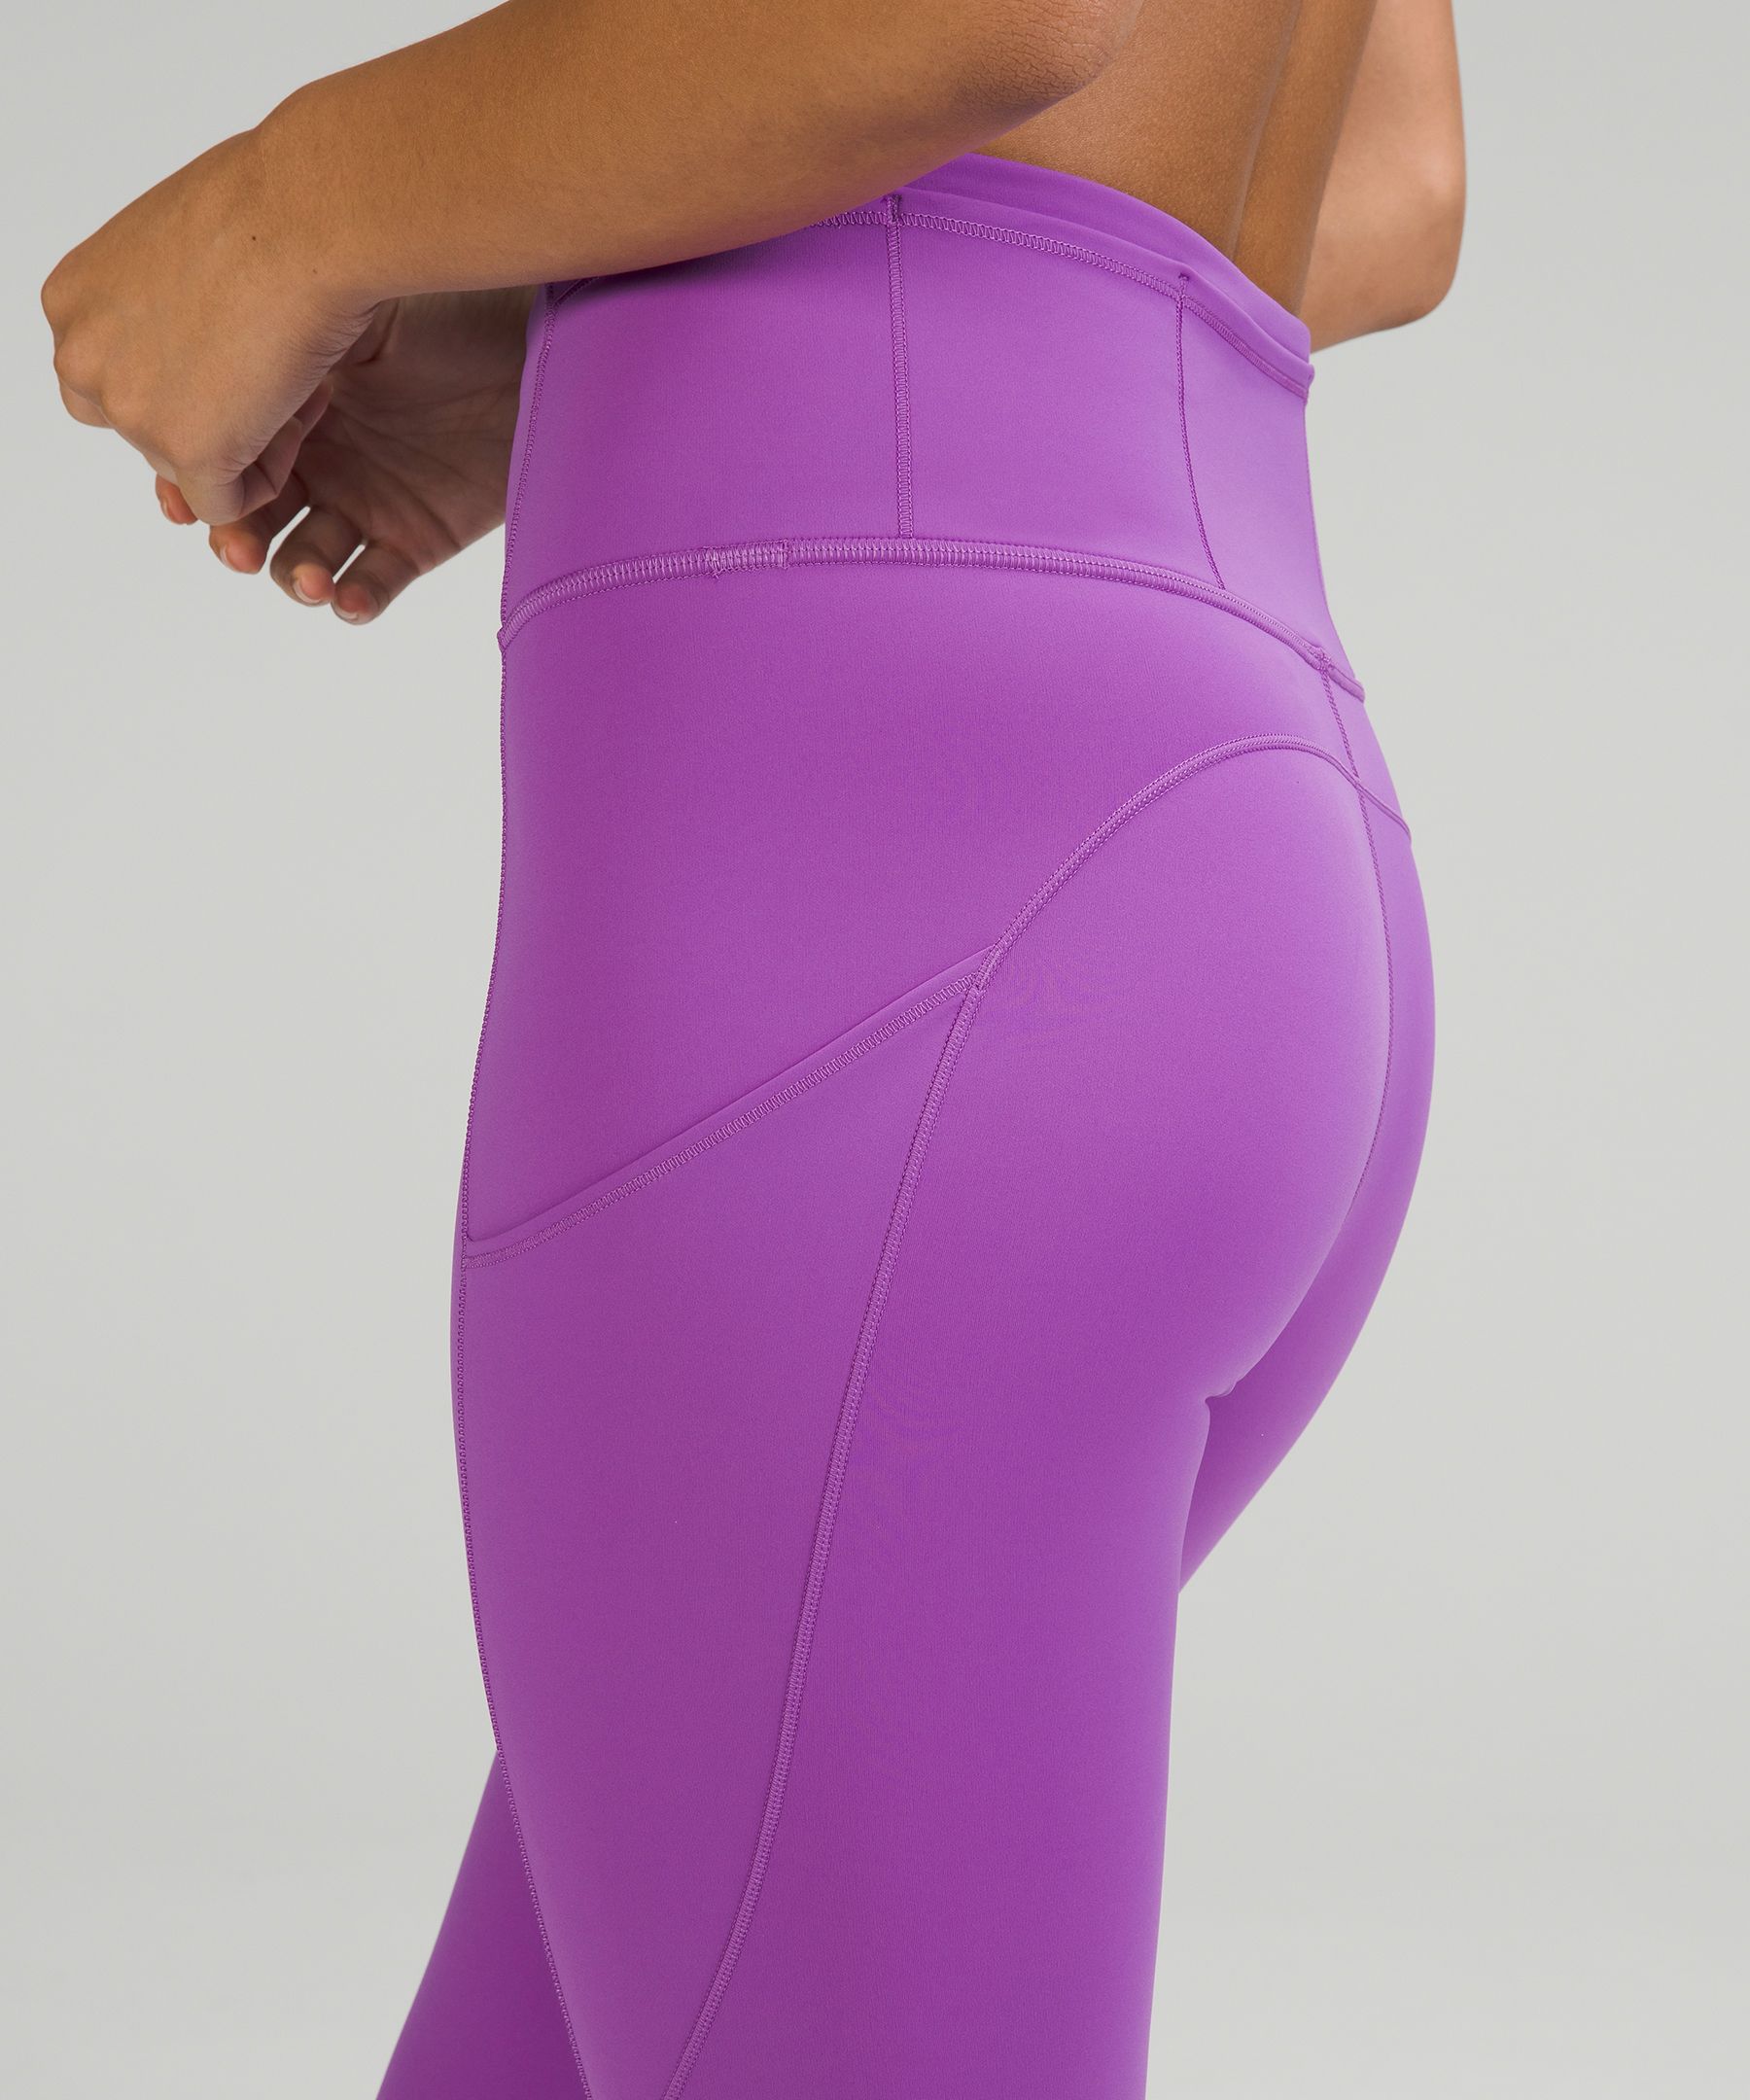 Lululemon Leggings Cropped Plum Criss Cross Mesh Mid Rise Size 6 Women -  $20 - From Cpeterson